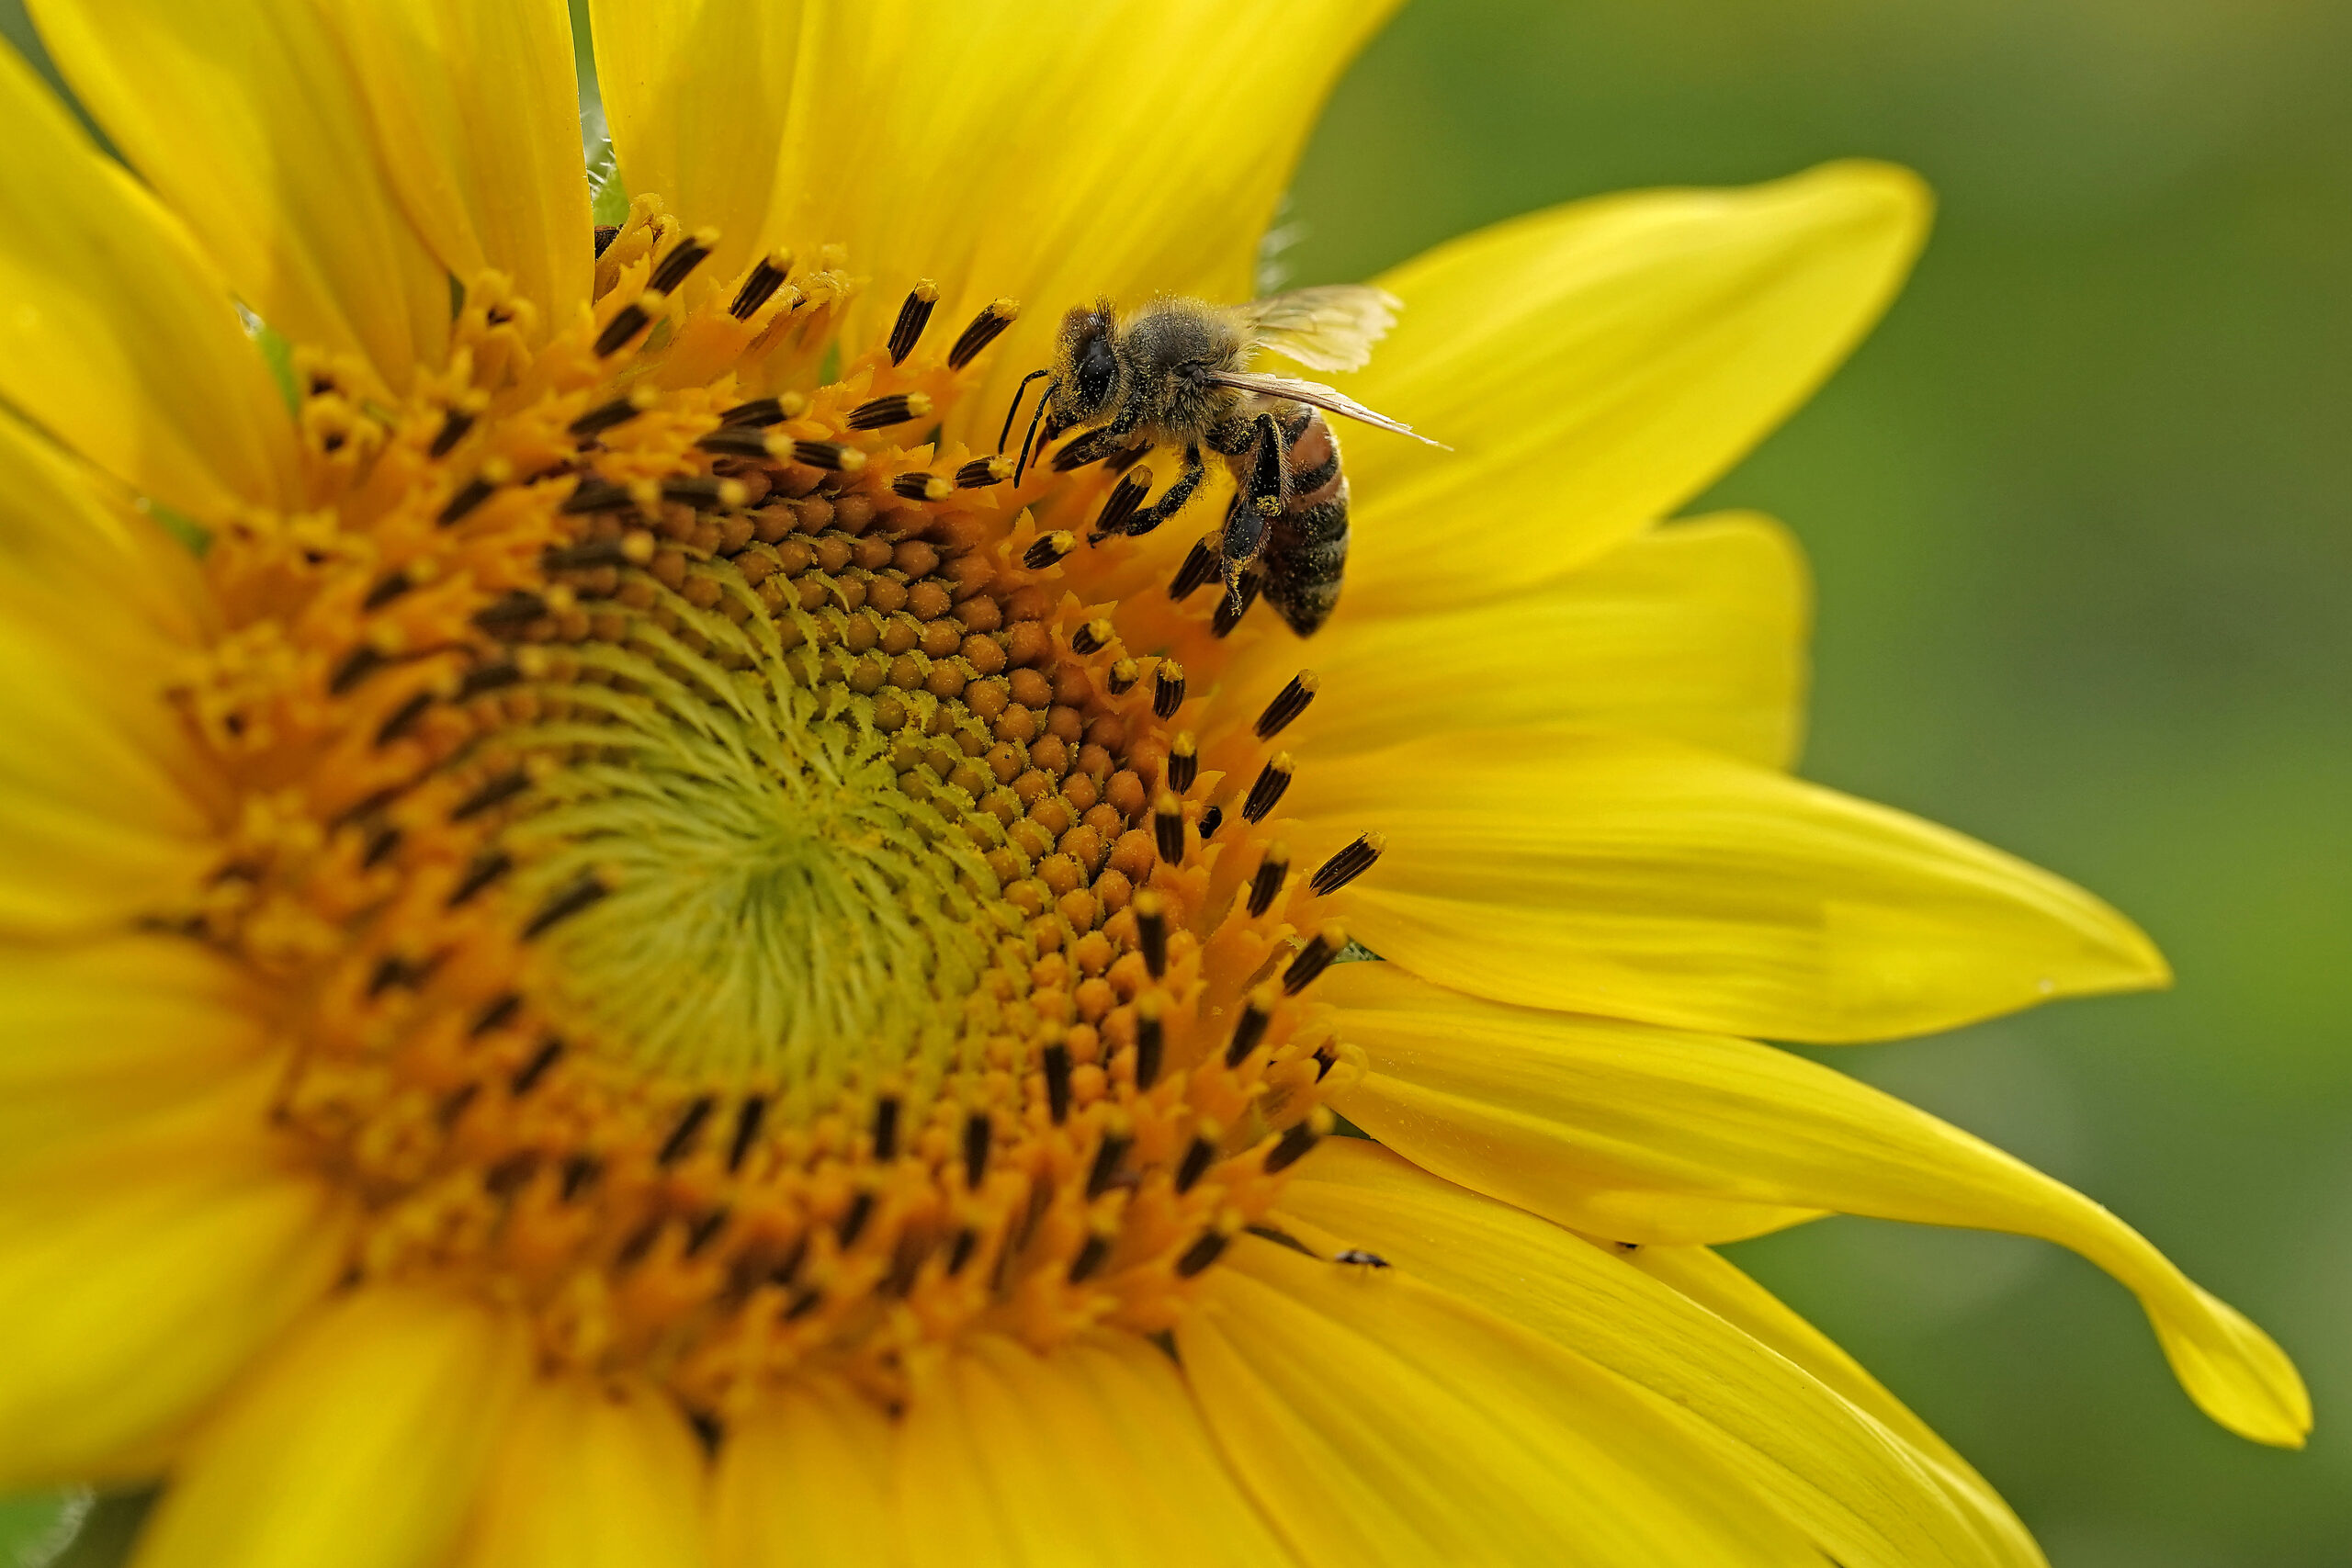 A close-up image of a bee sitting on a sunflower. There are specks of pollen all over the bee and flower.